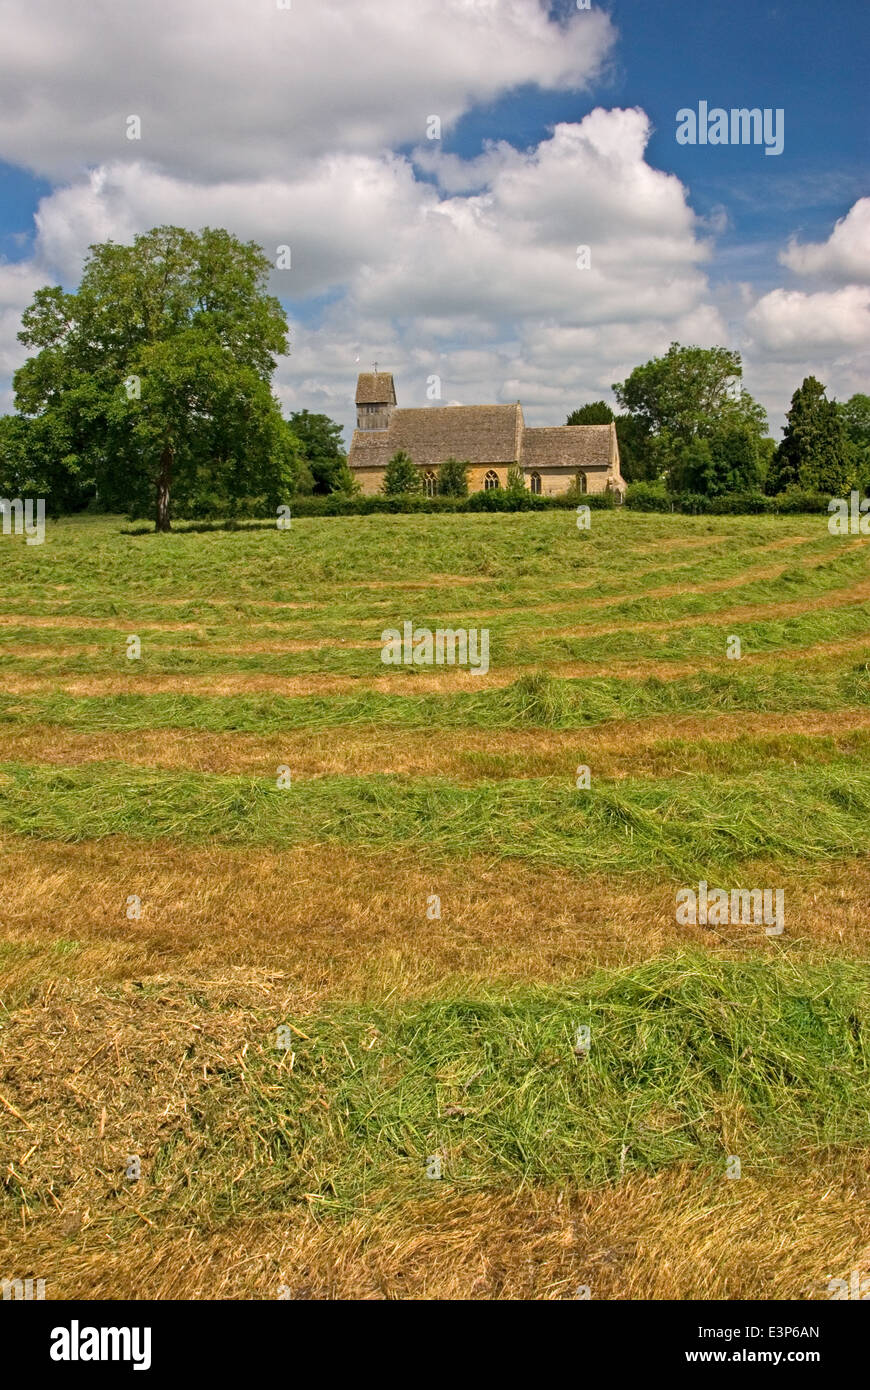 Village church in  the village of Long Marston overlooks a freshly mown meadow. Stock Photo